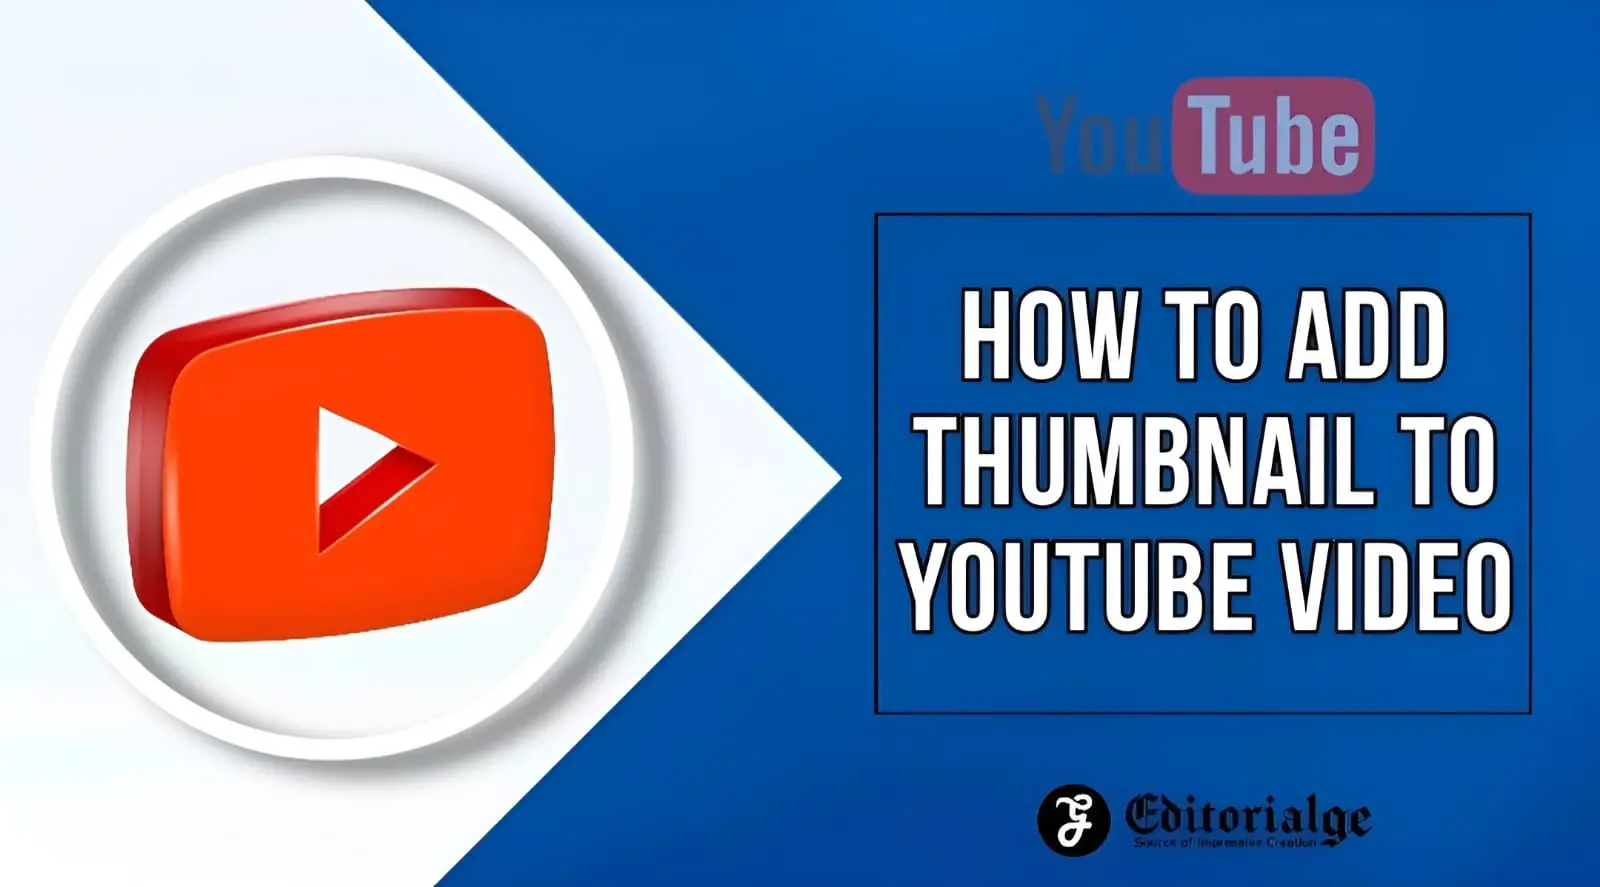 How to Add Thumbnail to Youtube Video